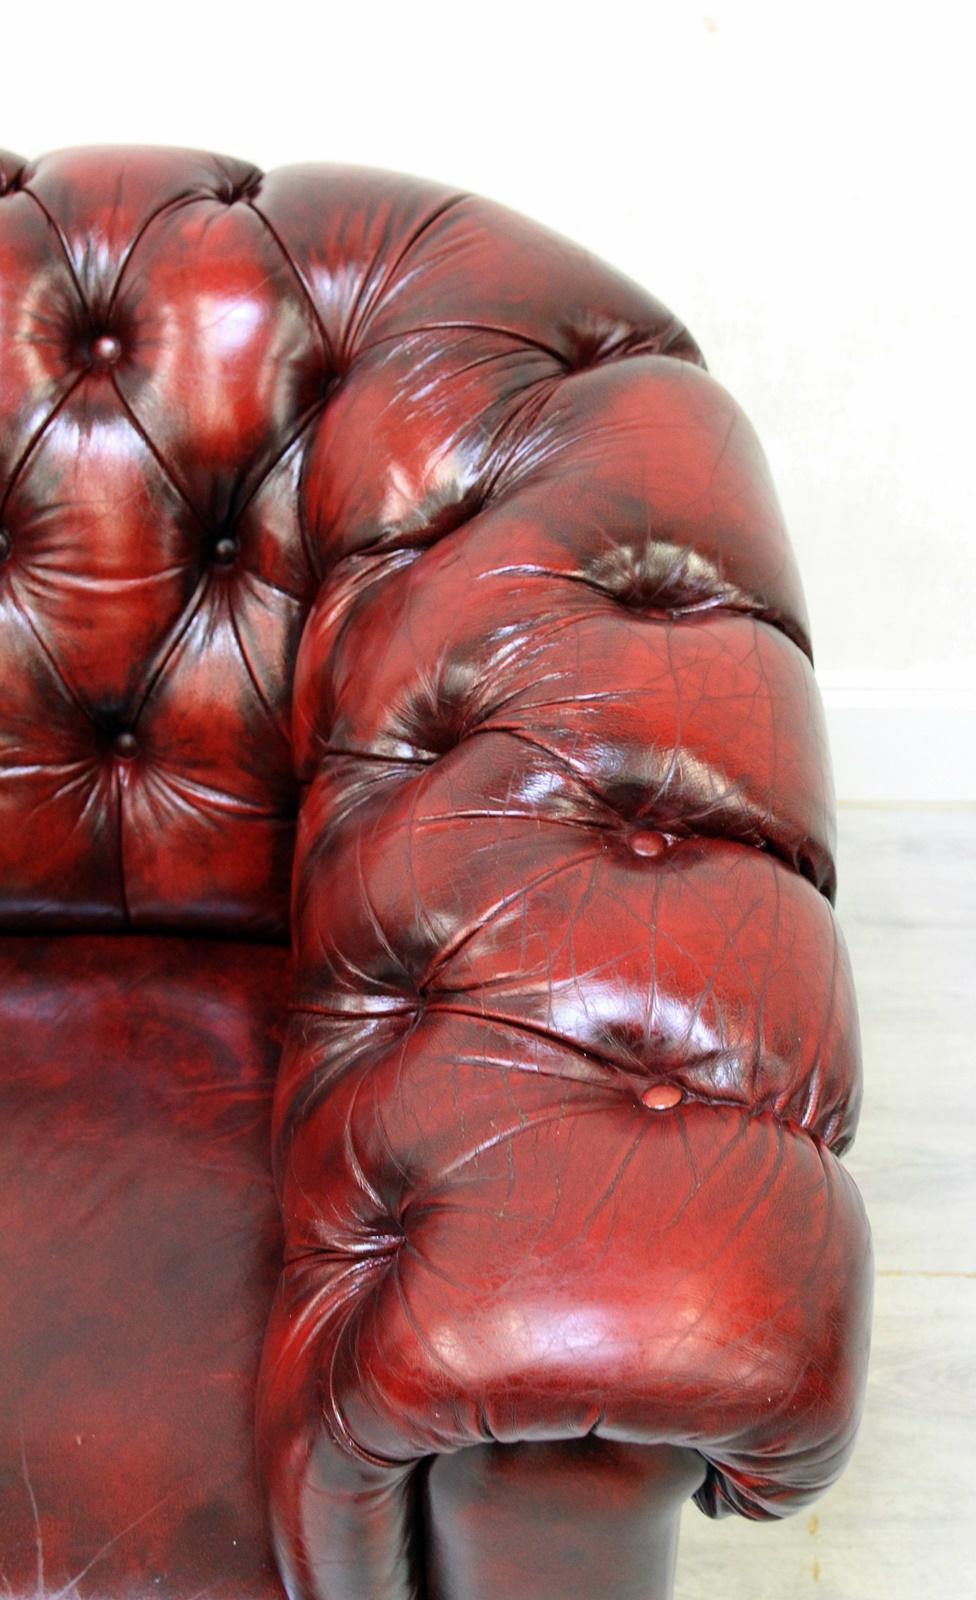 Chesterfield Sofa Set Armchair Genuine Leather Couch Antique Oxblood In Good Condition For Sale In Lage, DE